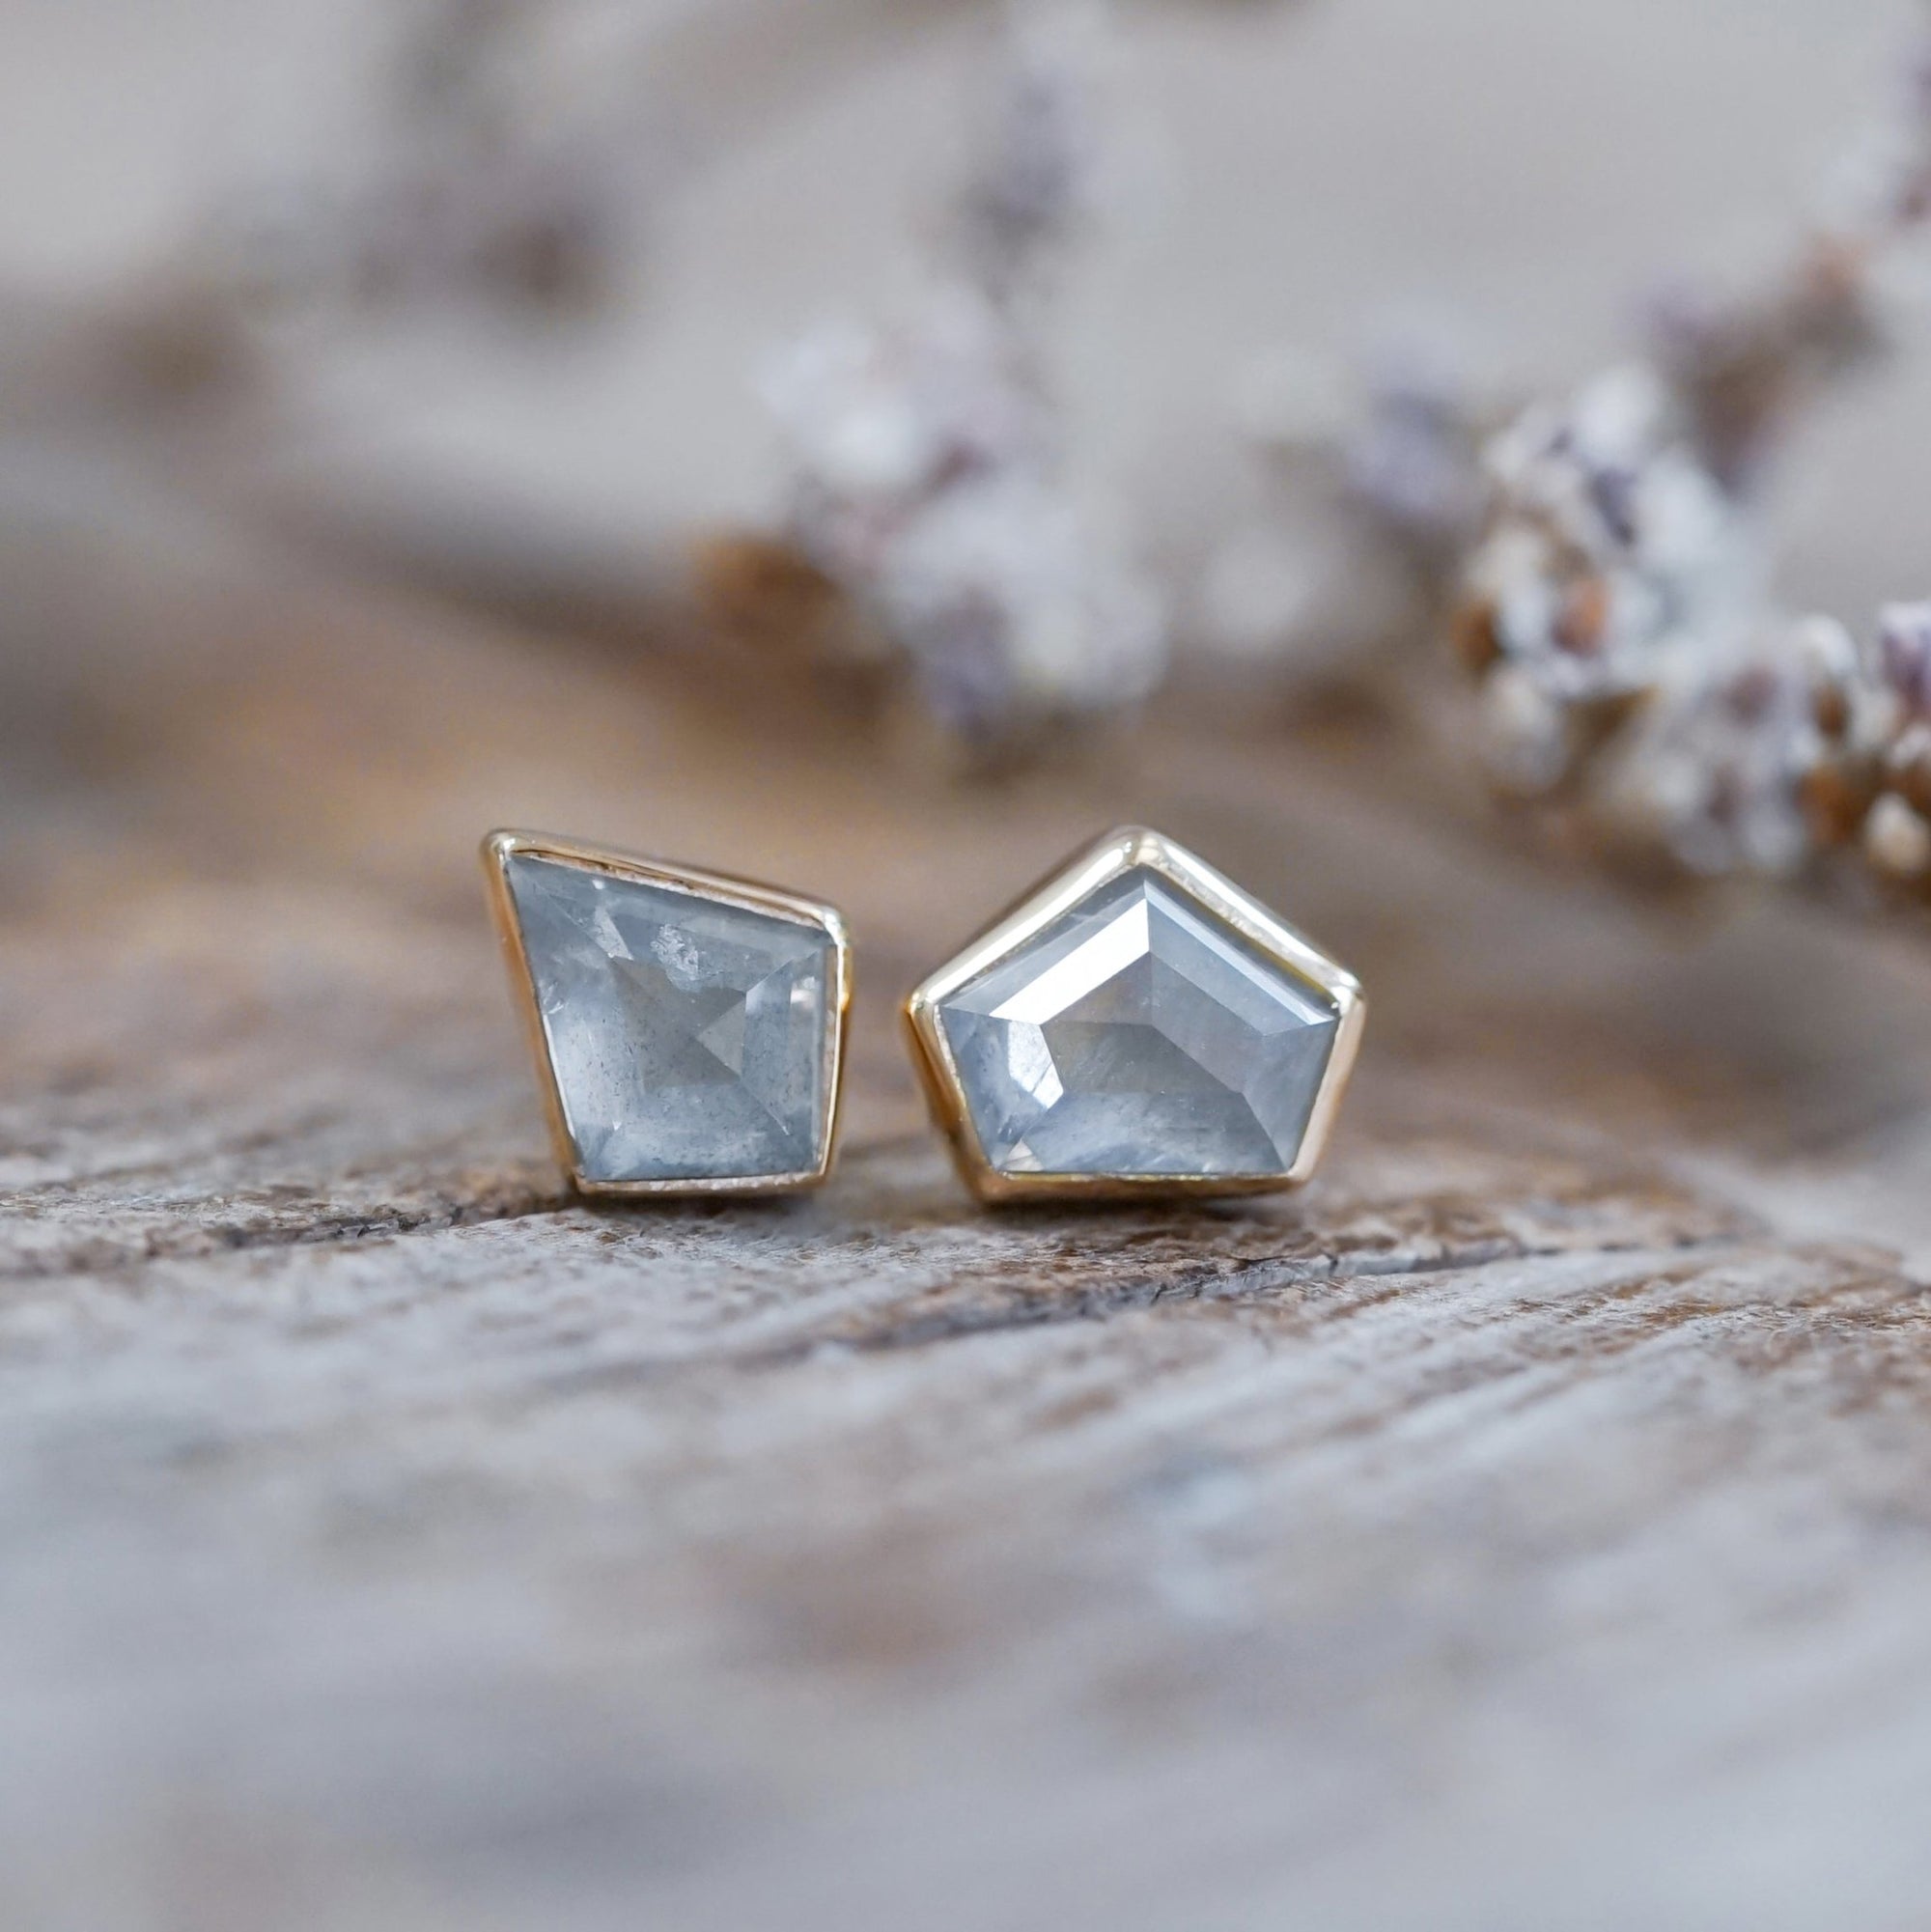 Mismatched Gray Diamond Earrings in Ethical Gold - Gardens of the Sun | Ethical Jewelry